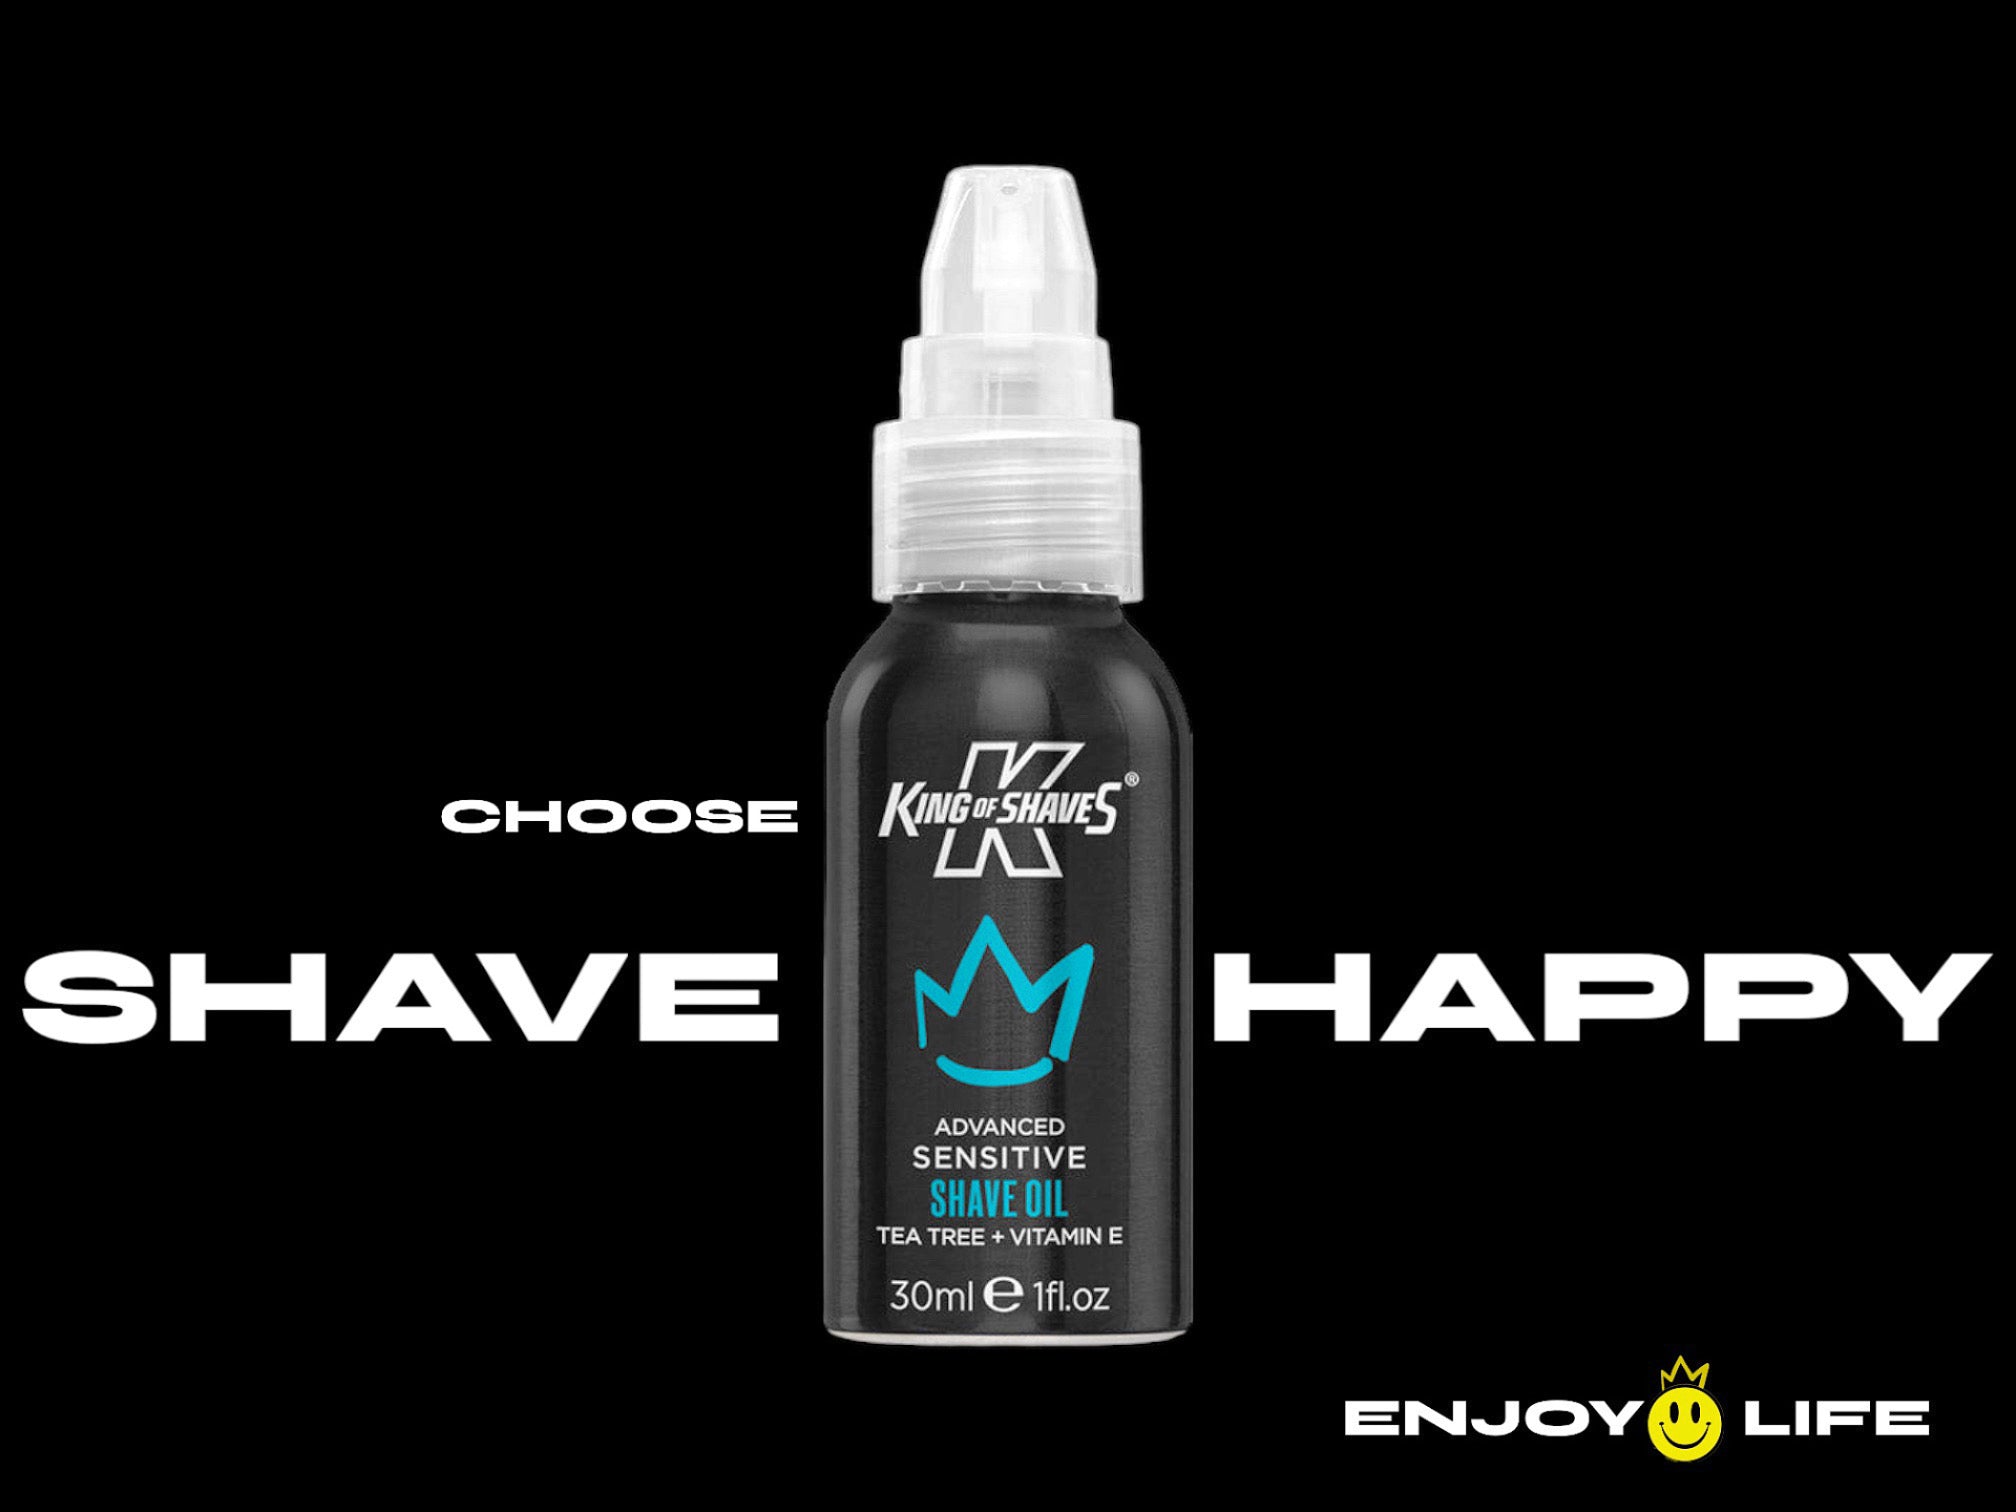 WHY CHOOSE KING OF SHAVES? TO SHAVE HAPPY AND ENJOY LIFE OF COURSE!